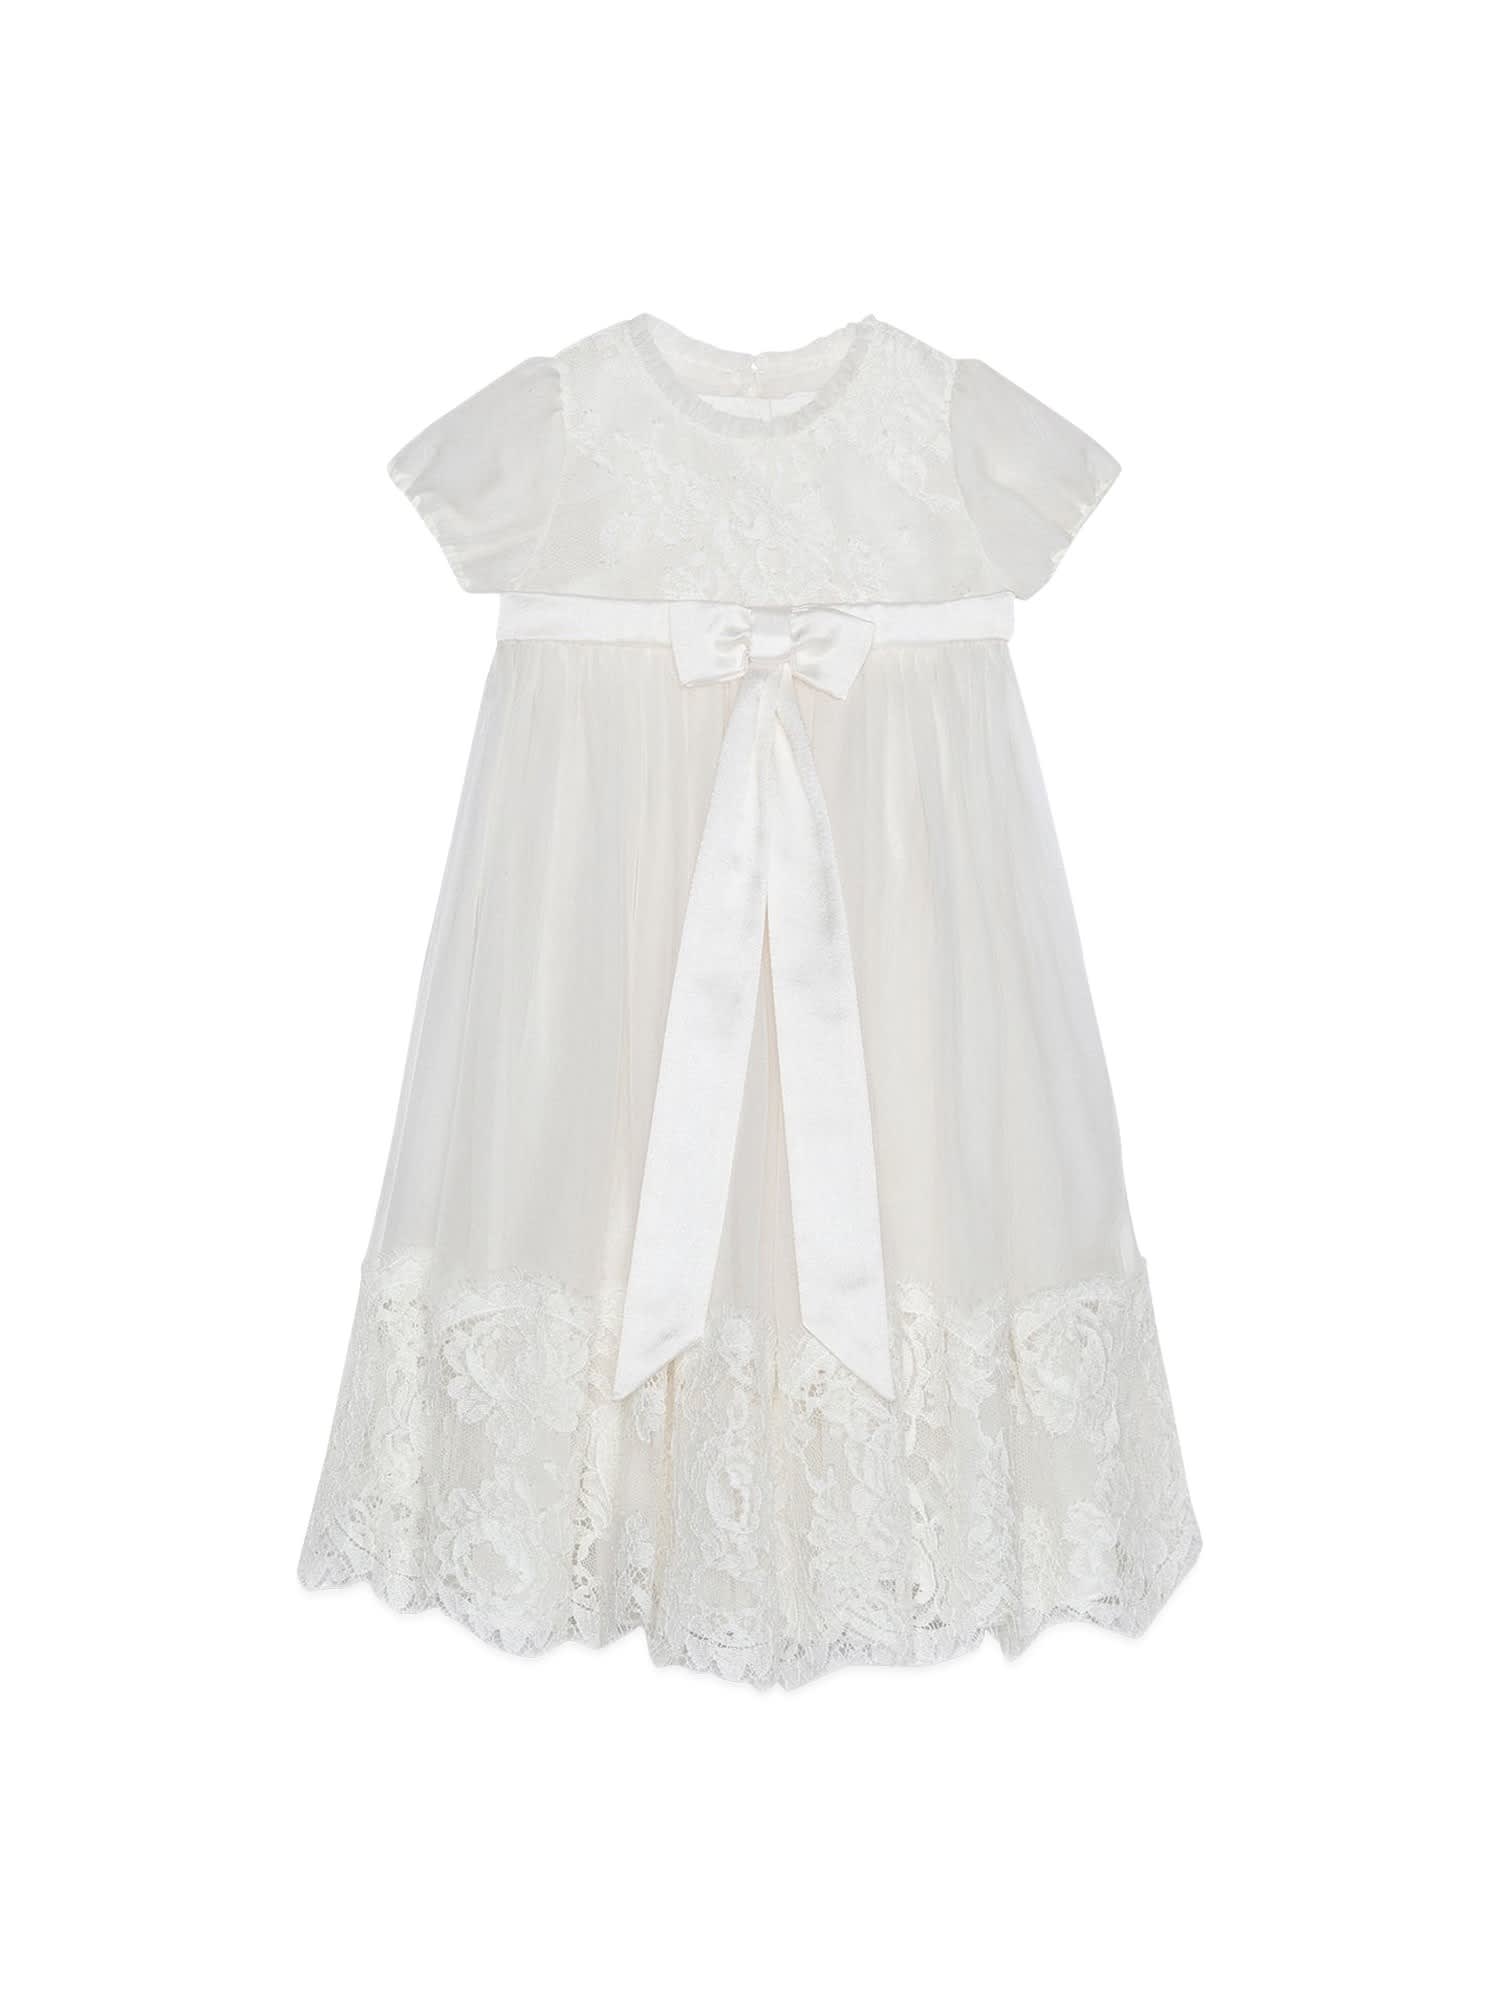 DOLCE & GABBANA M/C BAPTISM DRESS BOW AND EMBROIDERY